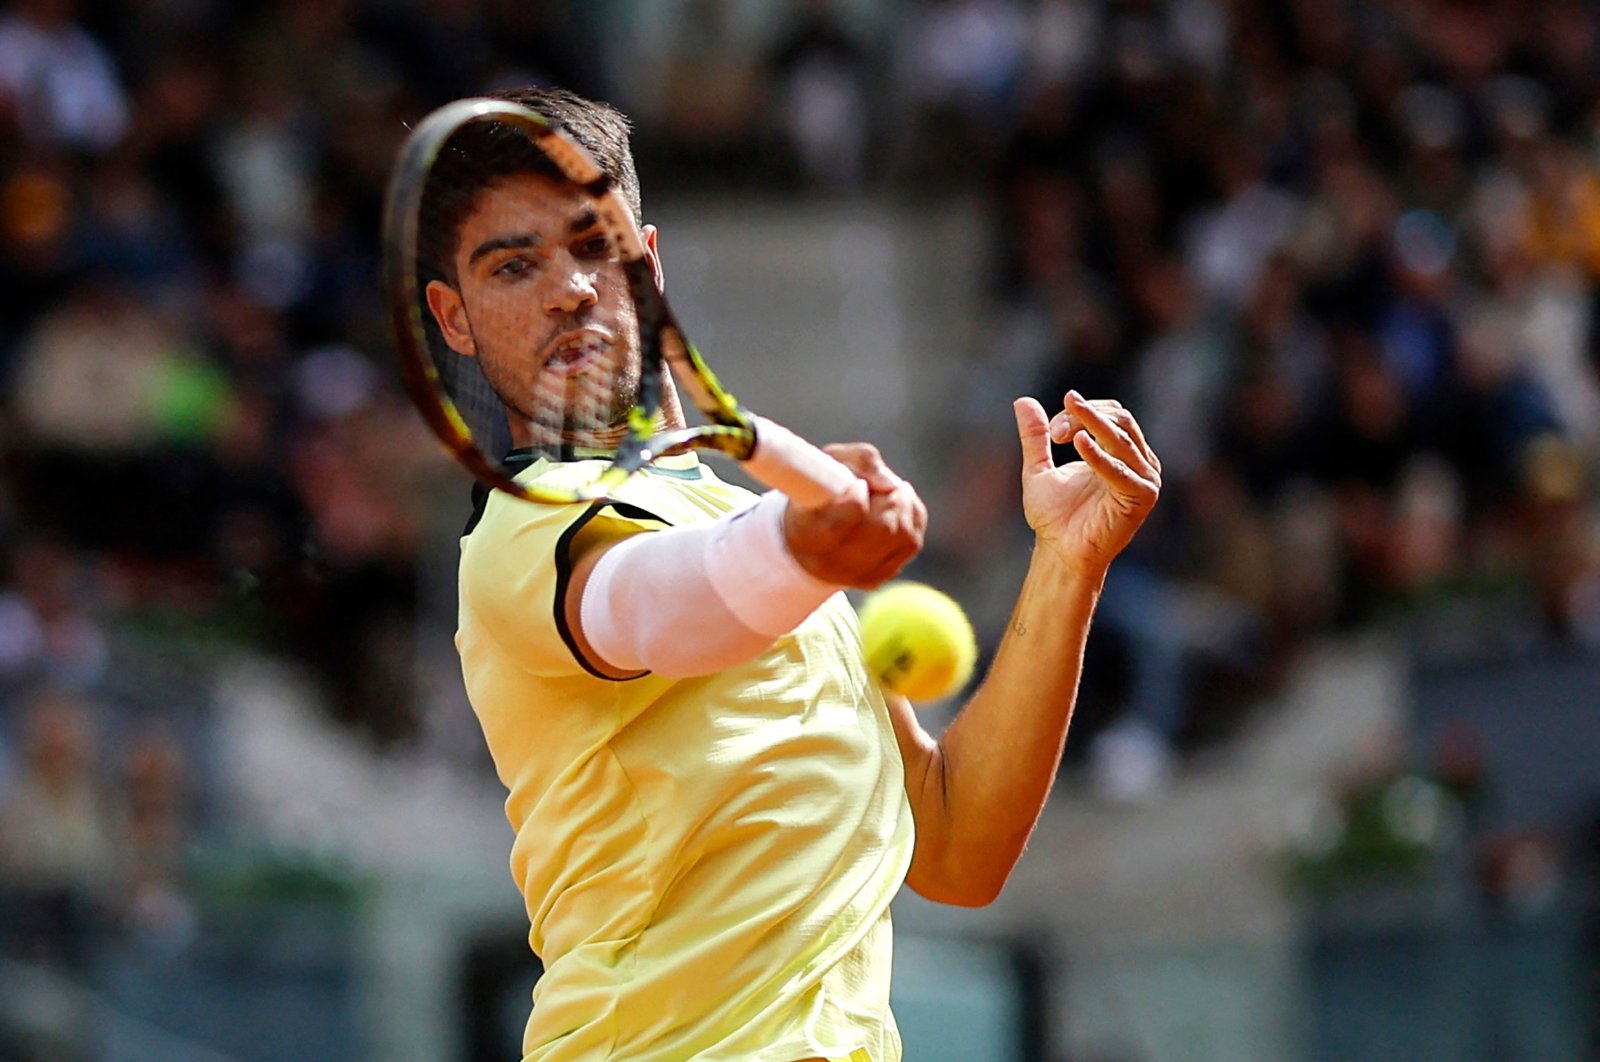 Alcaraz eases pain concerns, advances in Madrid Open